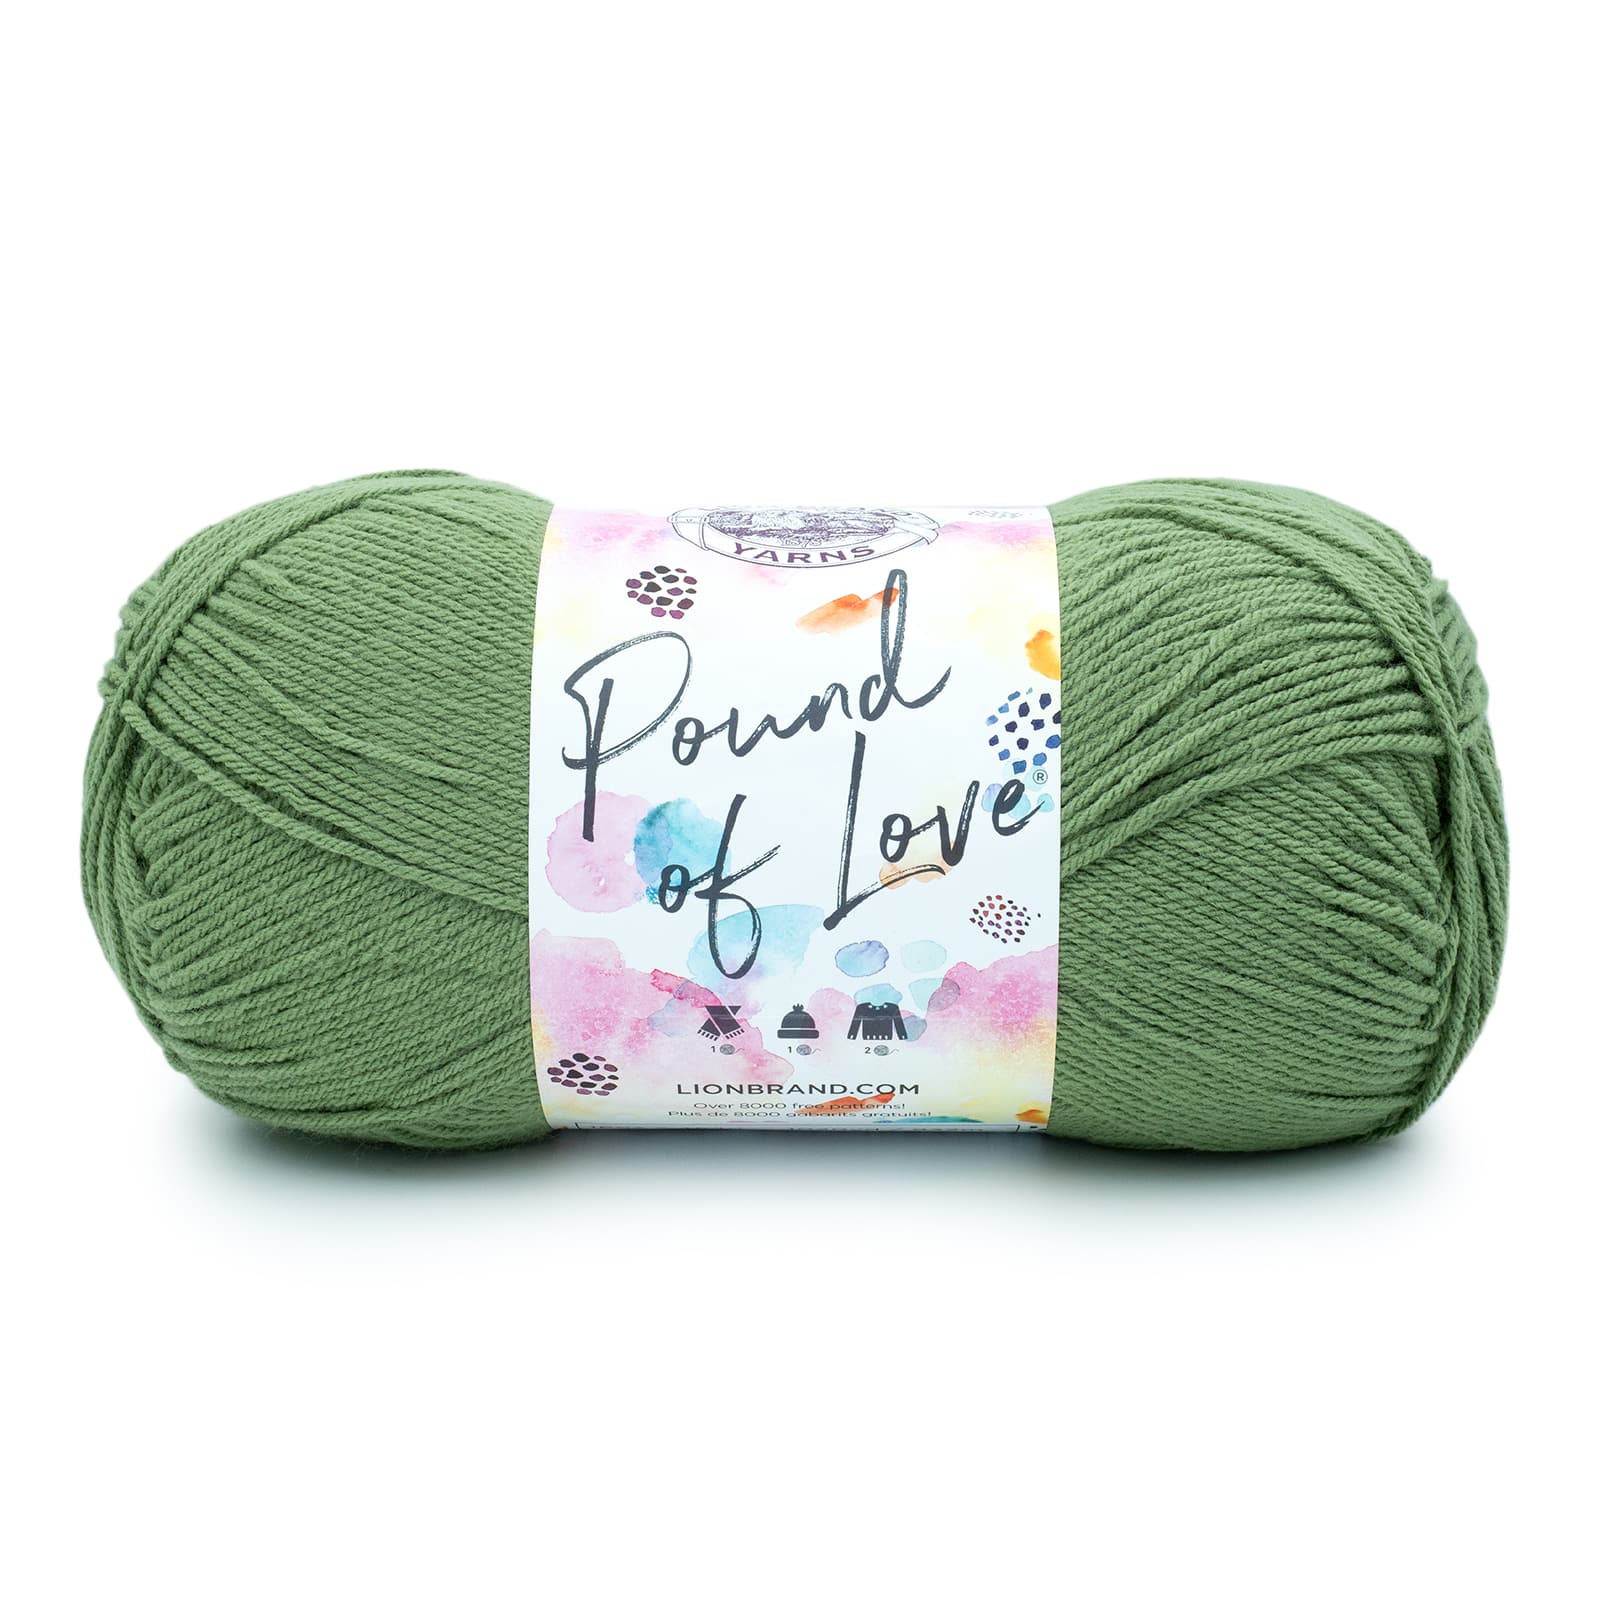 Lion Brand Cover Story Yarn in Alchemy | 35.2 | Michaels